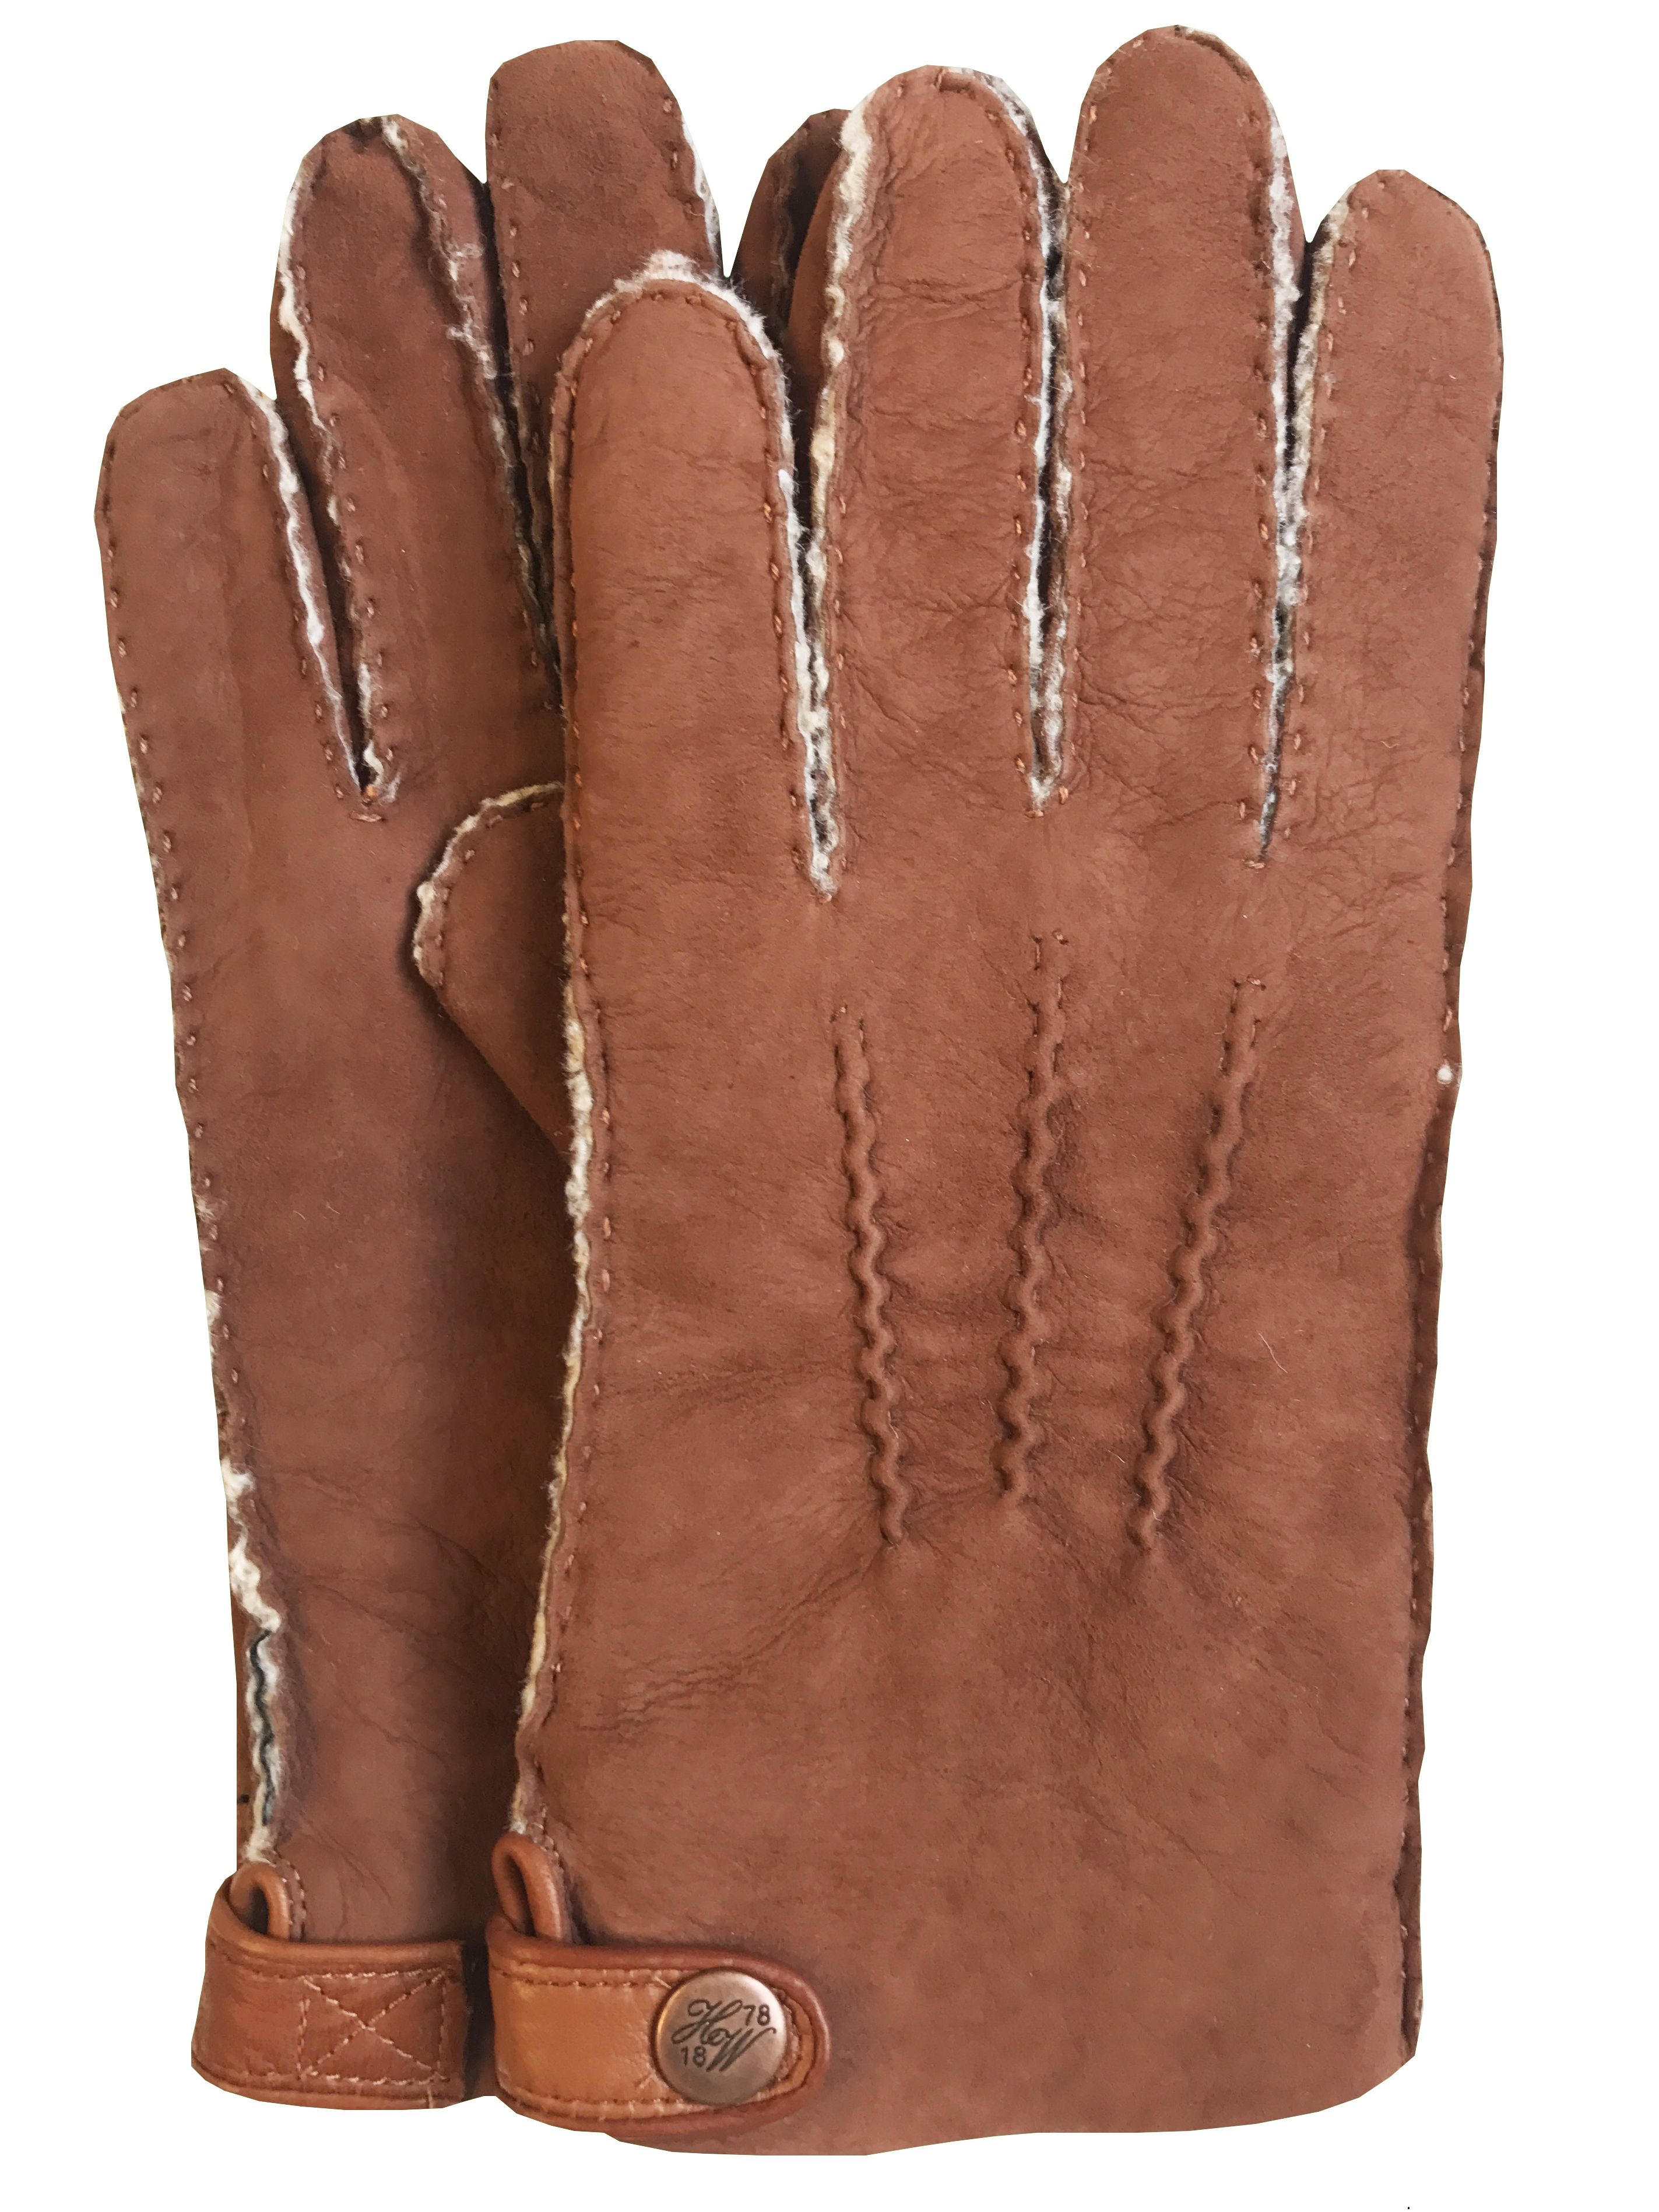 Gloves Handsewn Double-Faced Shearling